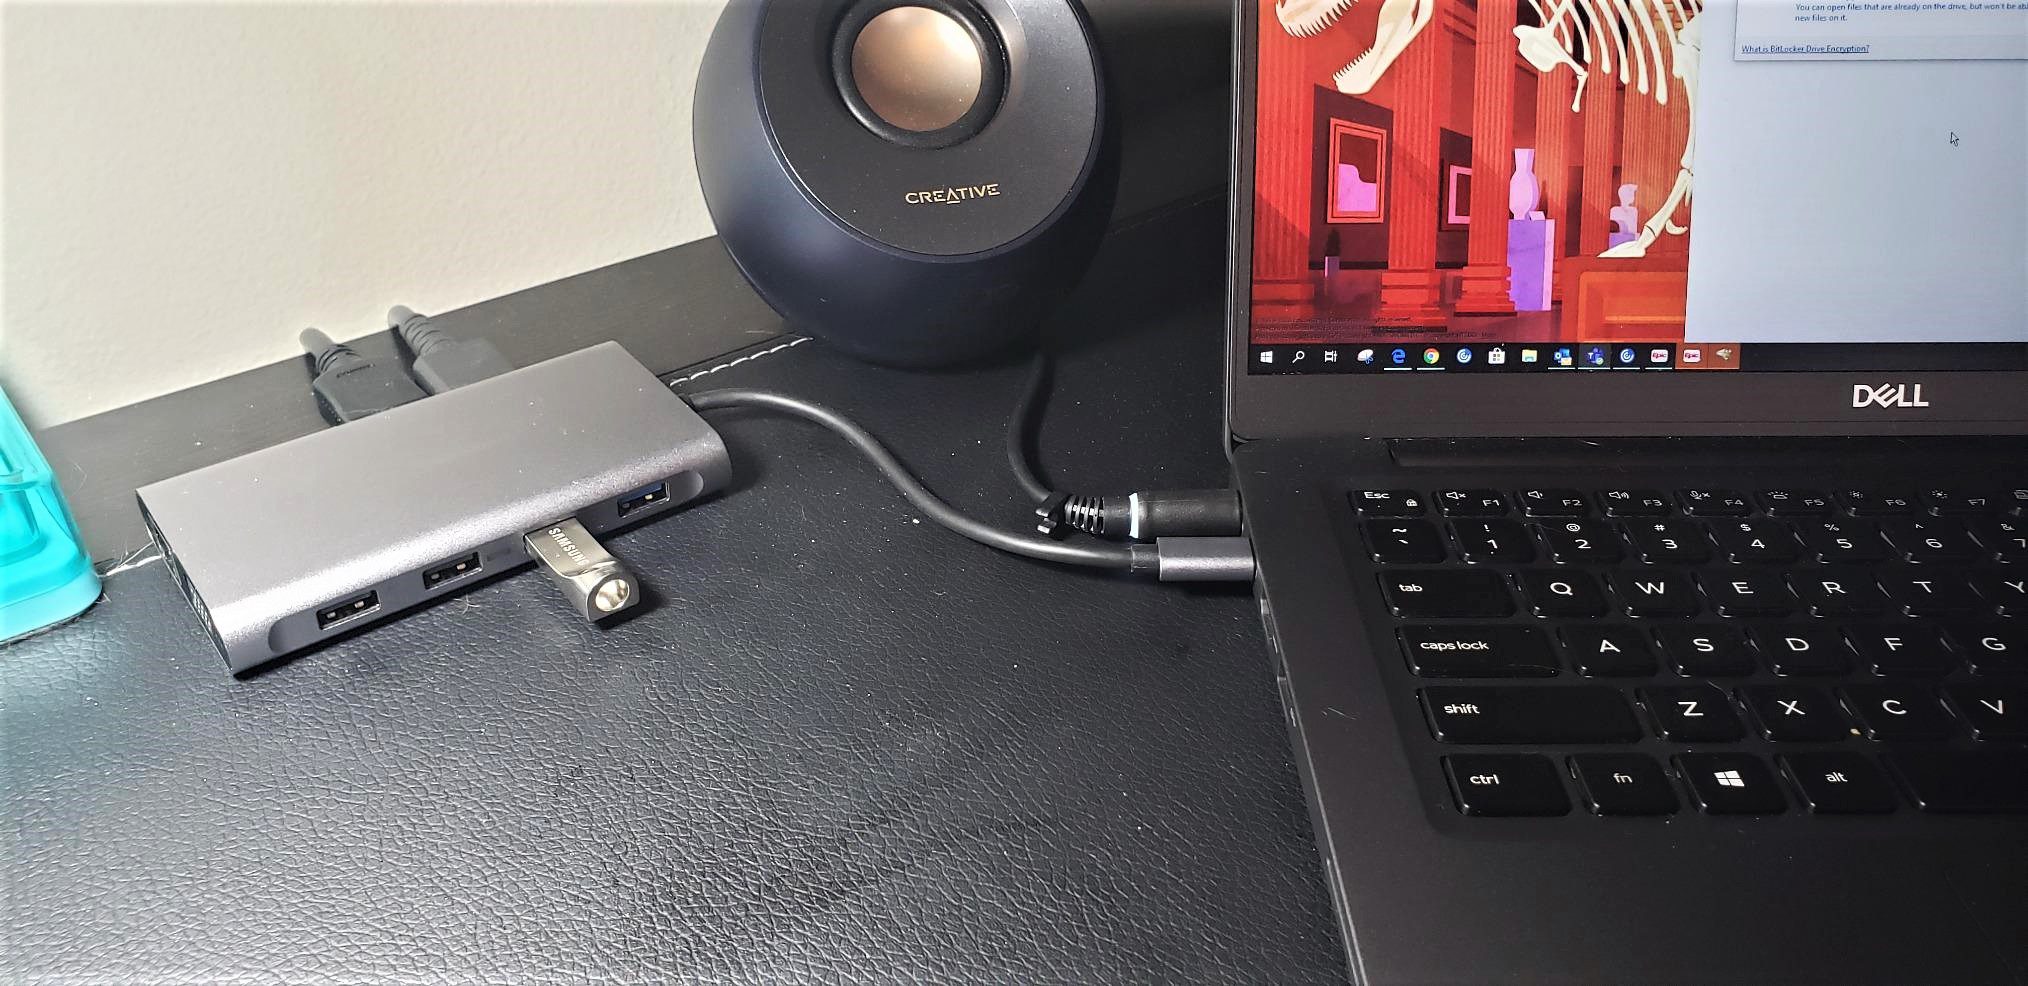 UtechSmart 11-in-1 Docking Station Review